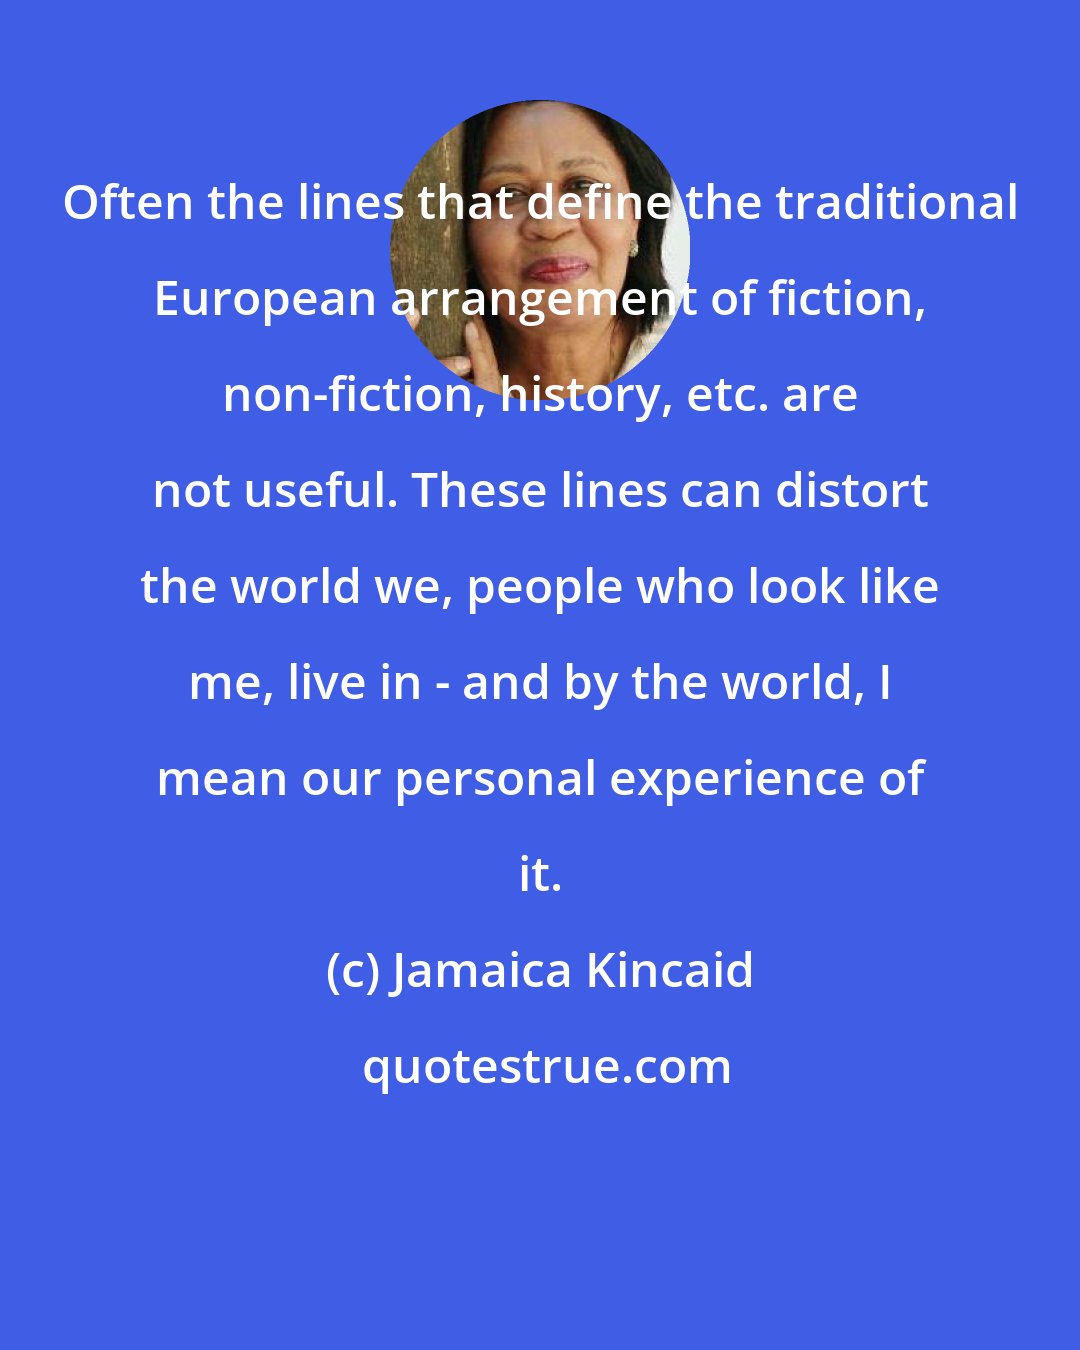 Jamaica Kincaid: Often the lines that define the traditional European arrangement of fiction, non-fiction, history, etc. are not useful. These lines can distort the world we, people who look like me, live in - and by the world, I mean our personal experience of it.